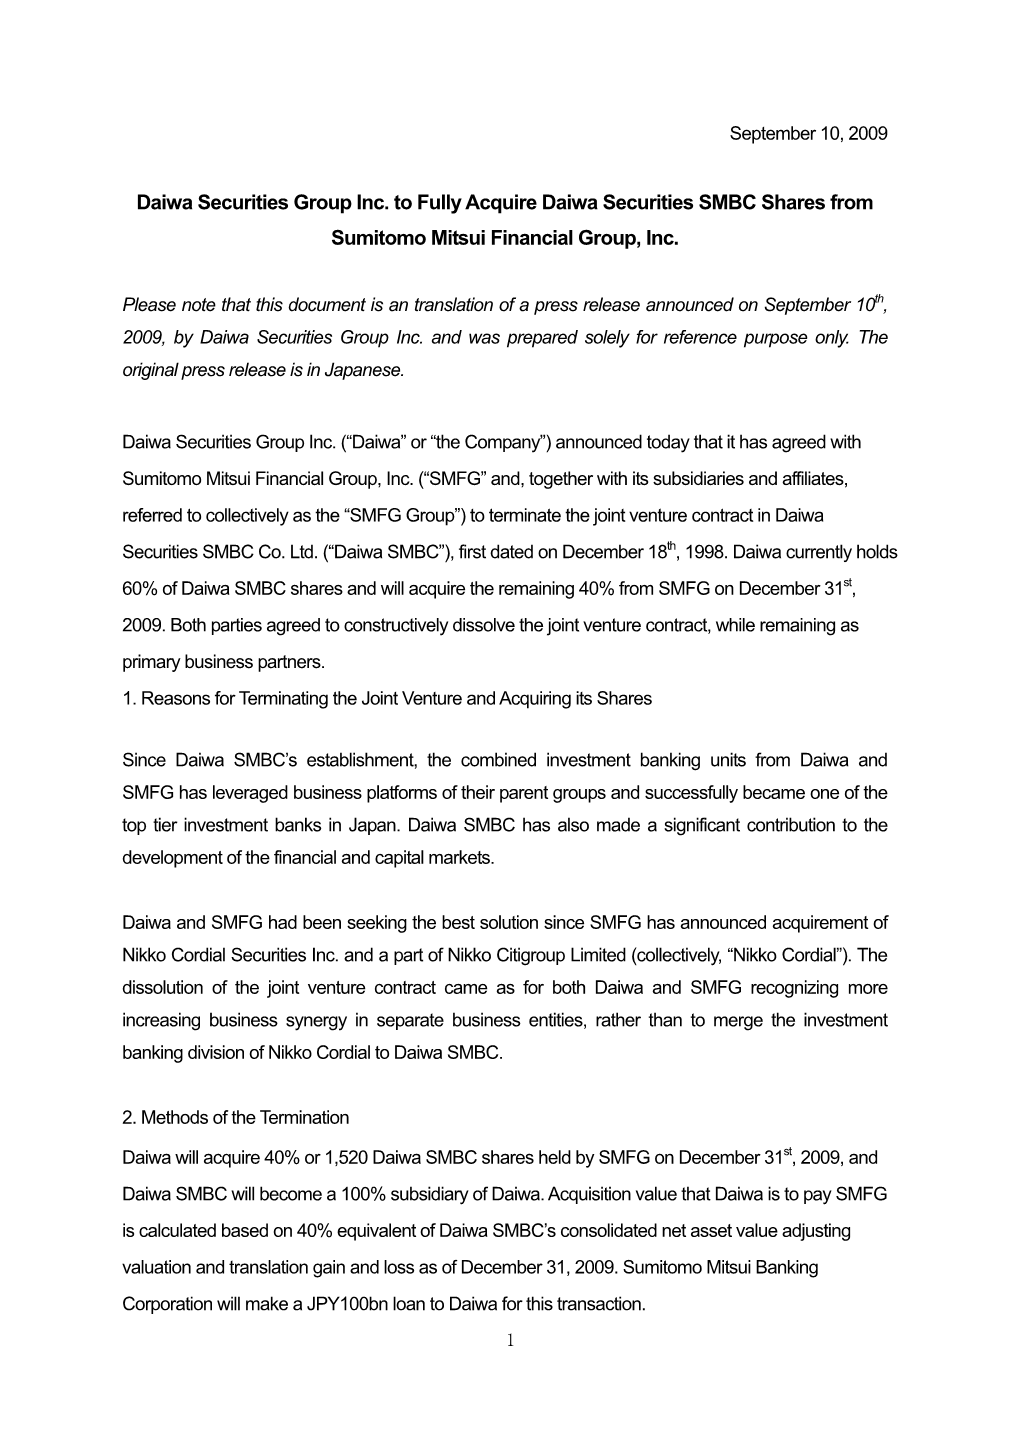 Daiwa Securities Group Inc. to Fully Acquire Daiwa Securities SMBC Shares from Sumitomo Mitsui Financial Group, Inc